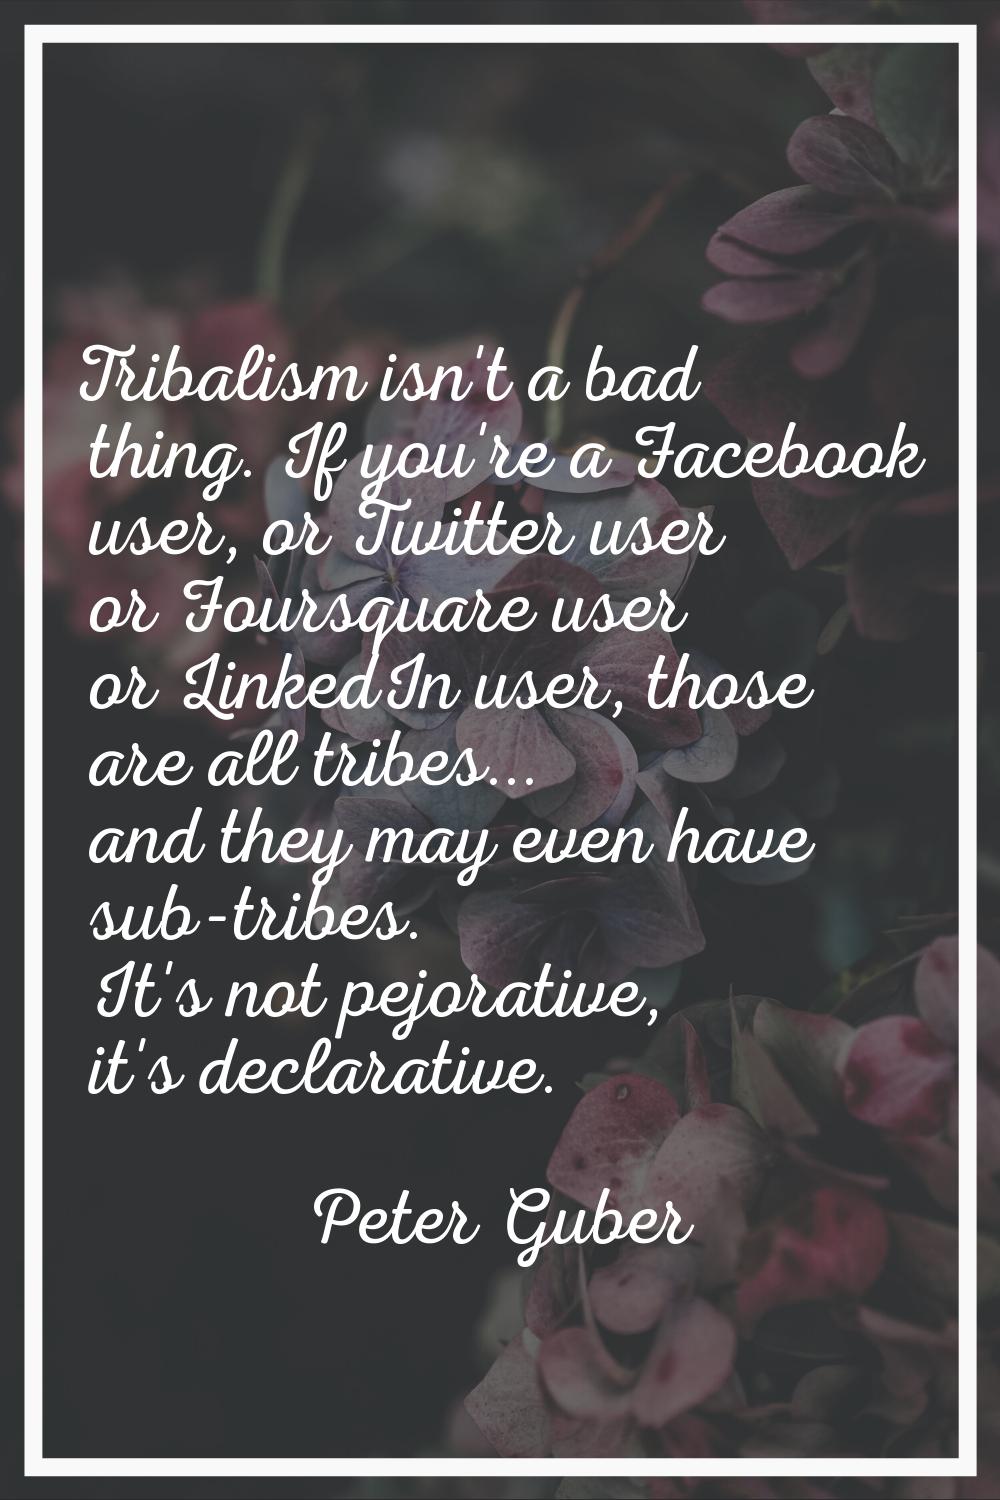 Tribalism isn't a bad thing. If you're a Facebook user, or Twitter user or Foursquare user or Linke